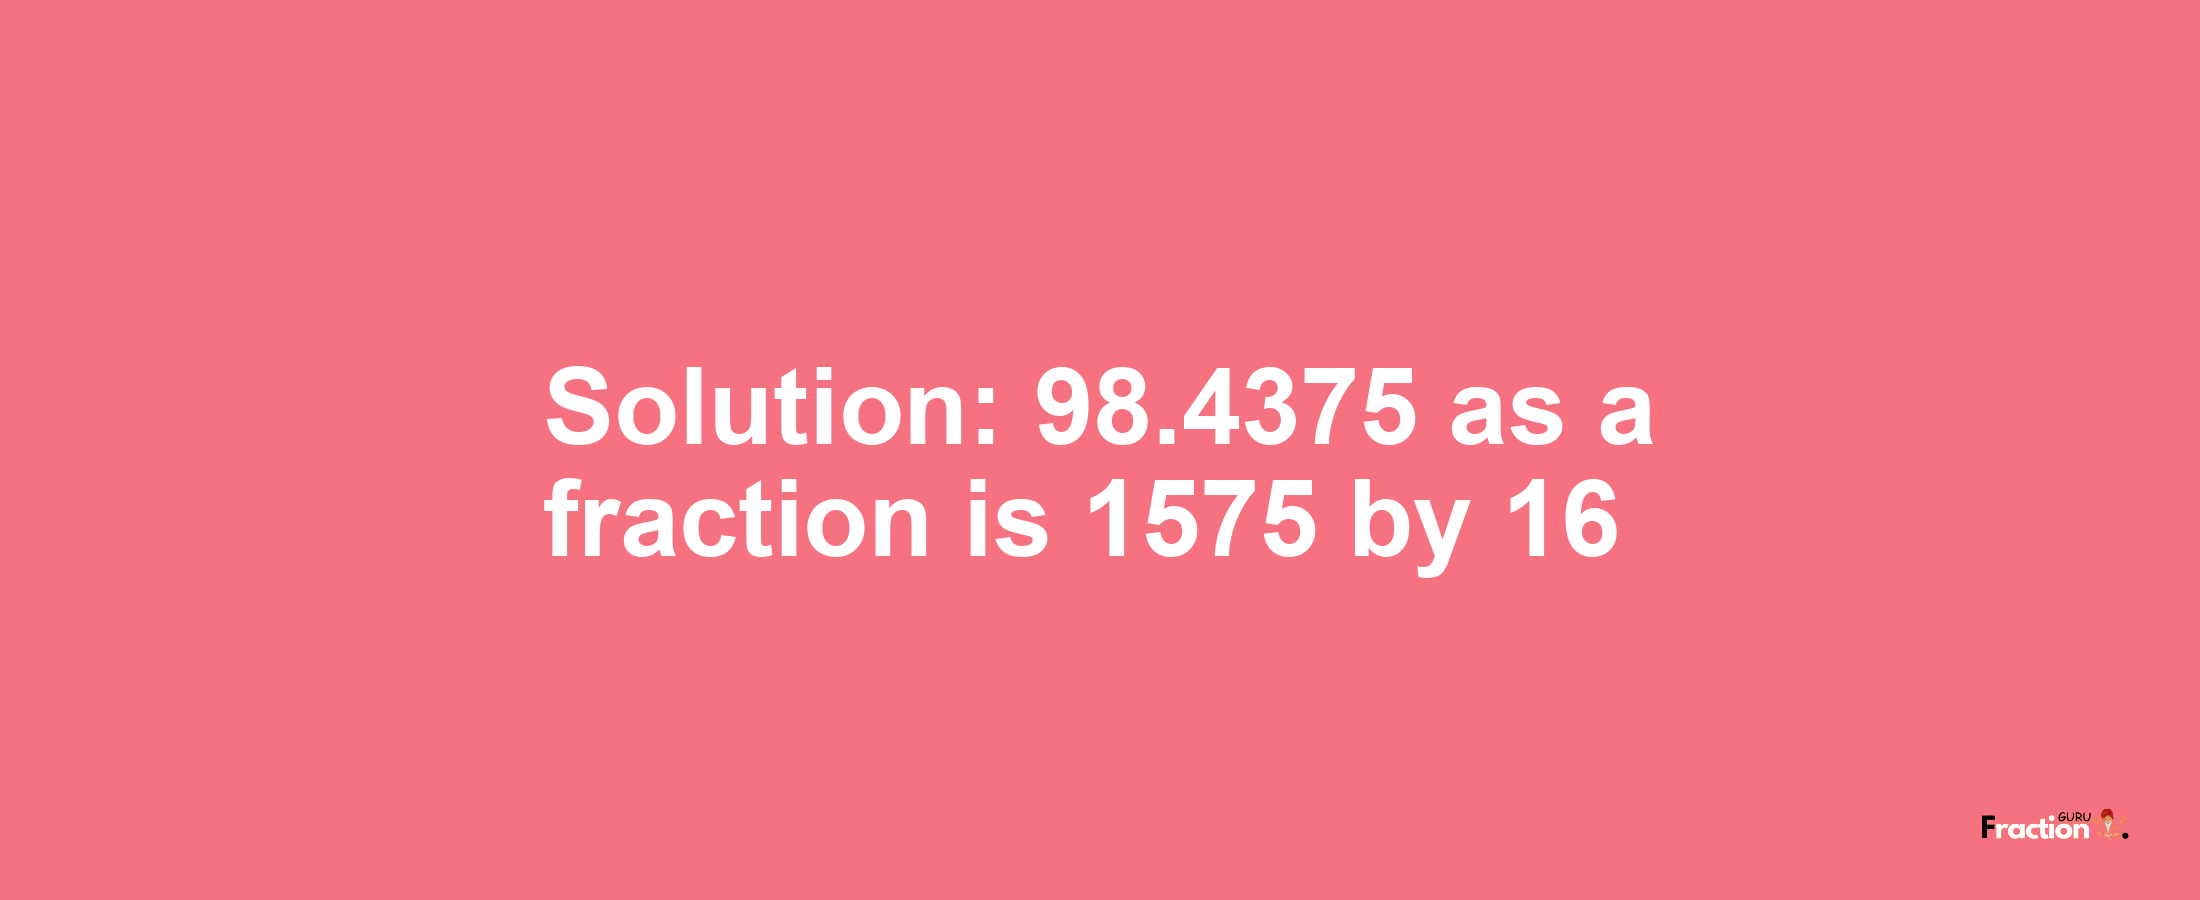 Solution:98.4375 as a fraction is 1575/16